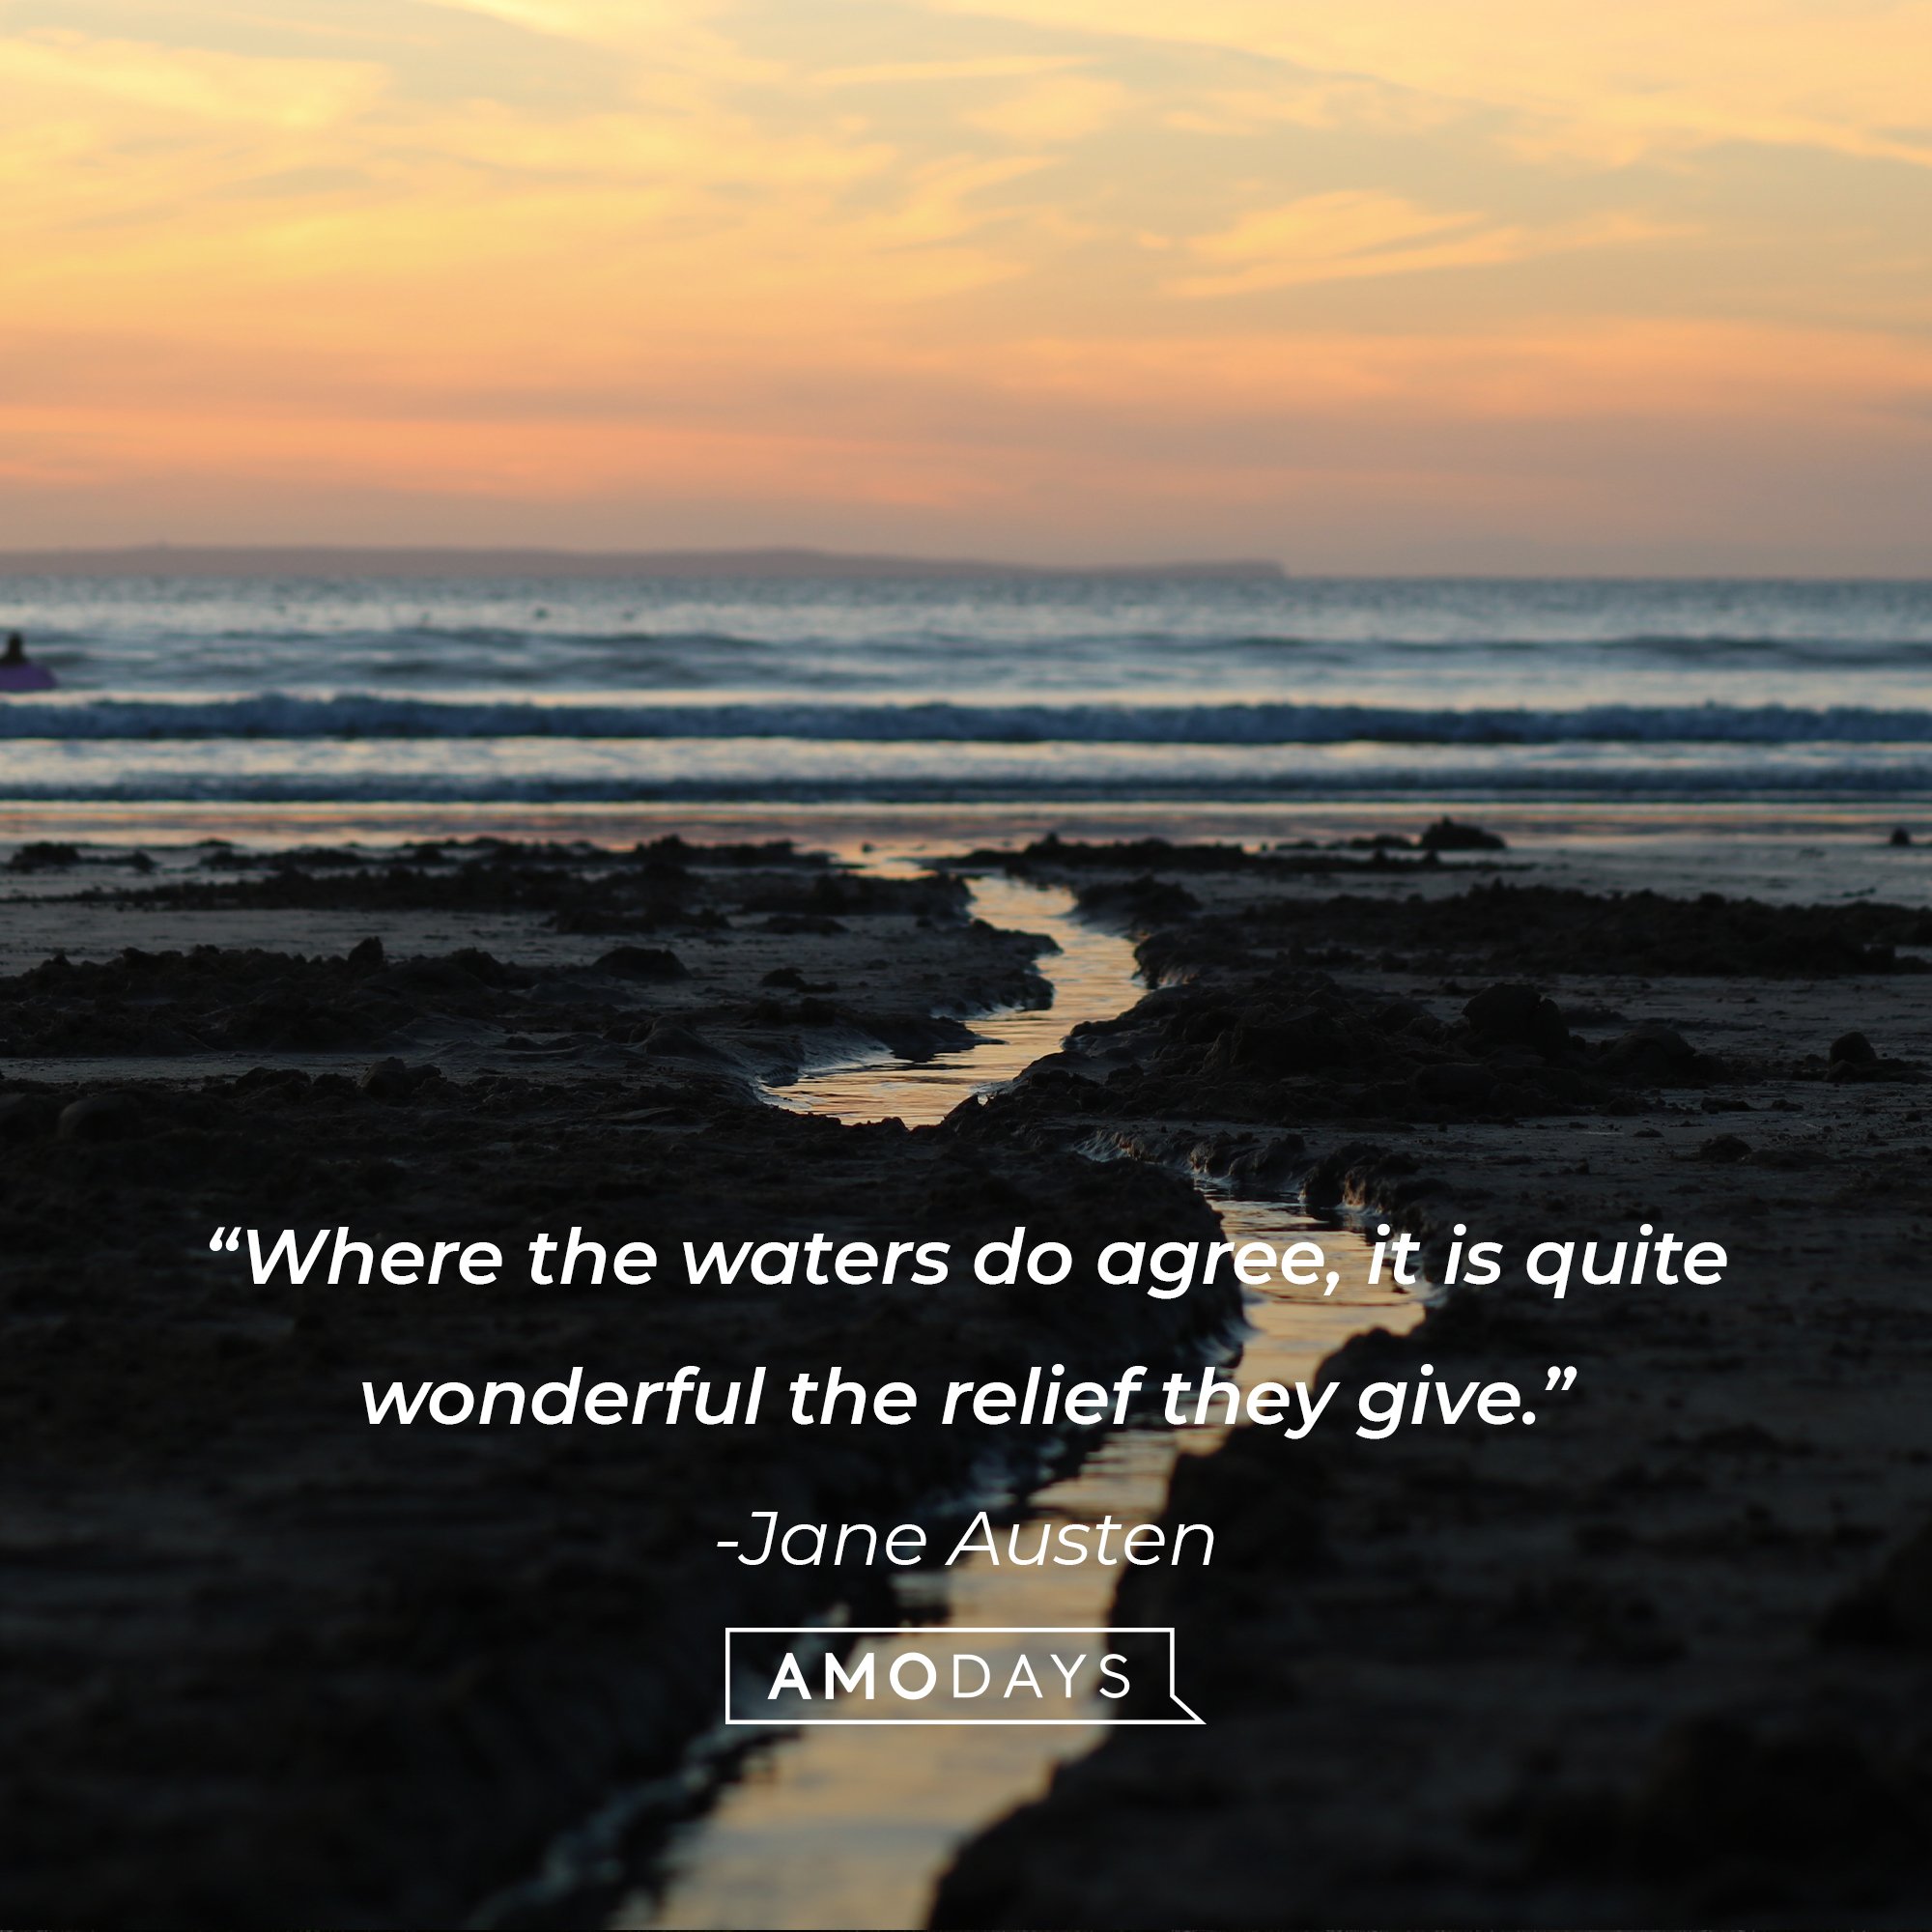 Jane Austen’s quote: "Where the waters do agree, it is quite wonderful the relief they give." | Image: AmoDays 